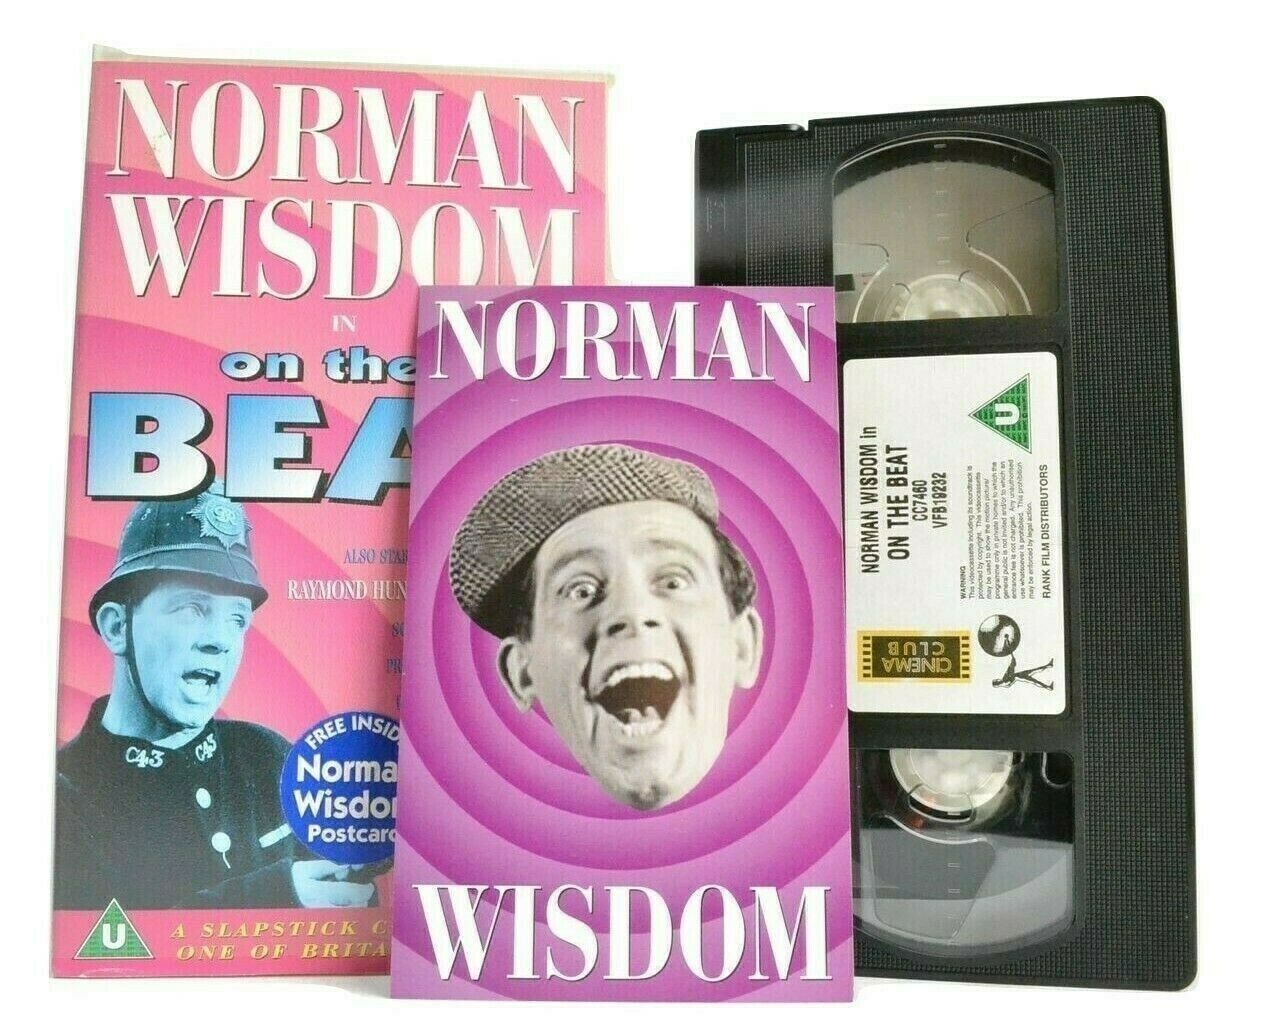 On The Beat (1962): Including Postcard - Slapstick Action - Norman Wisdom - VHS-